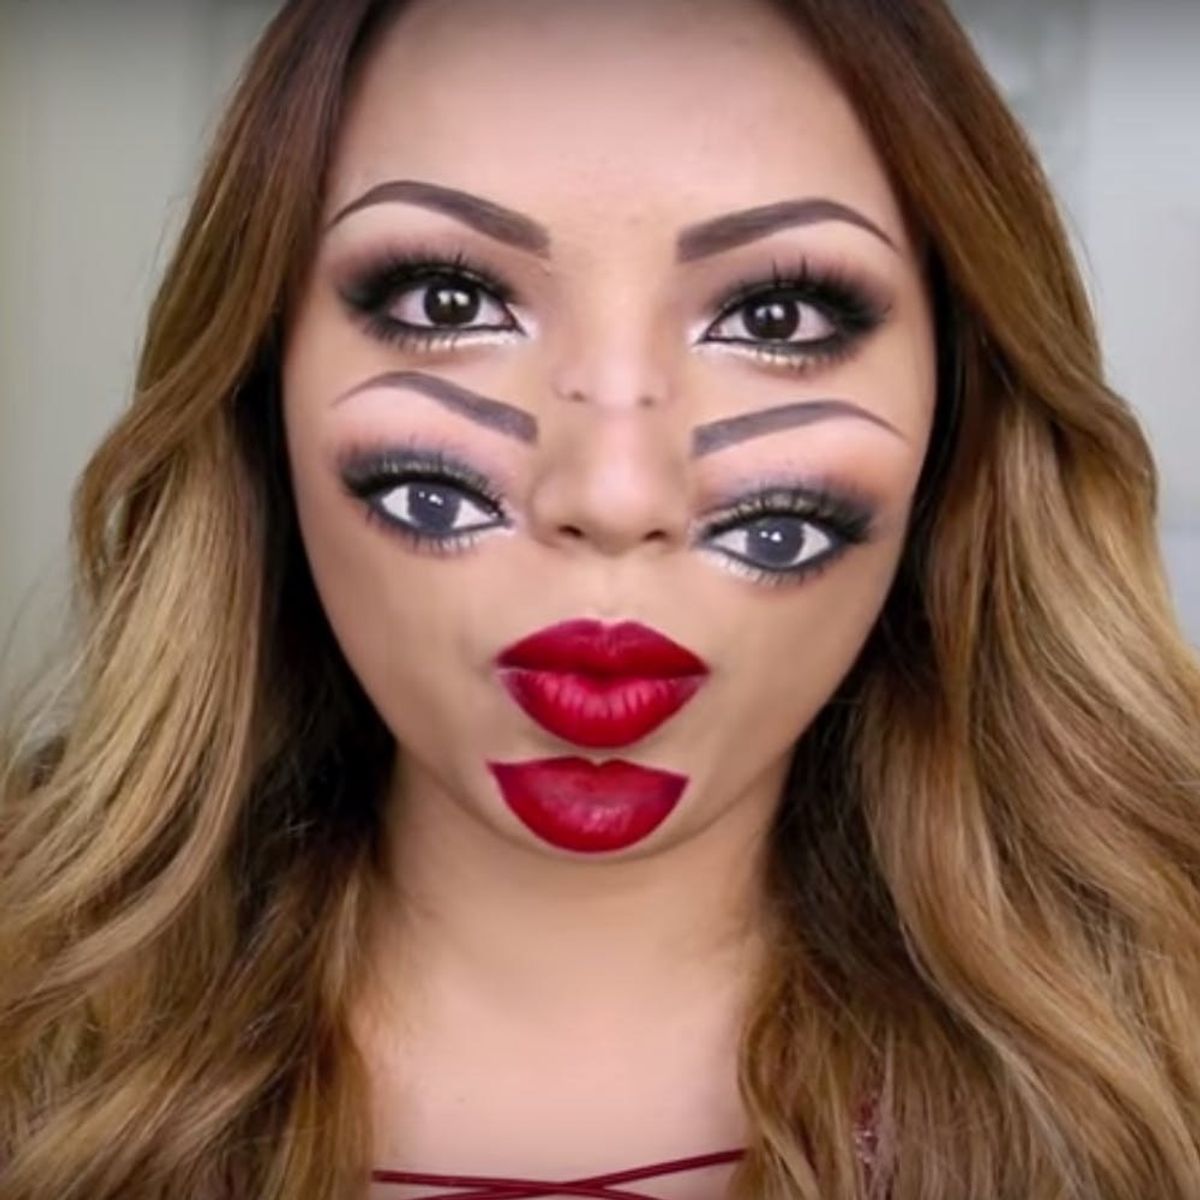 This Halloween Makeup Tutorial Will Totally Trip You Out